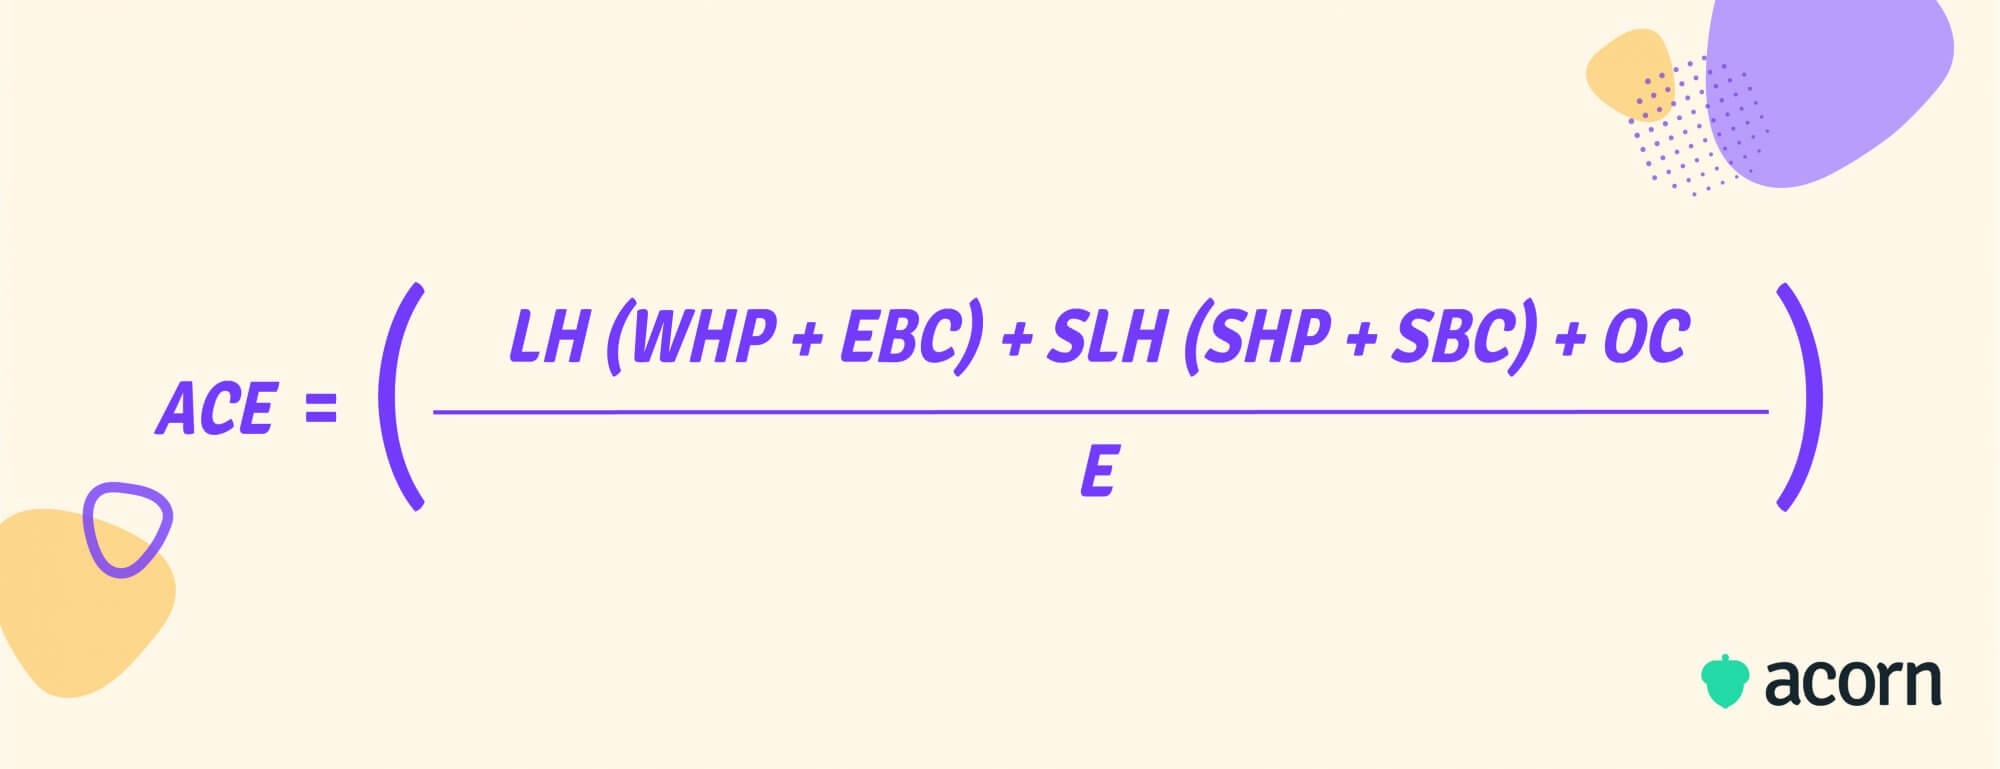 Cost of absenteeism formula: ACE = (LH x (WHP + EBC) + SLH x (SHP + SBC) + OC ) / E